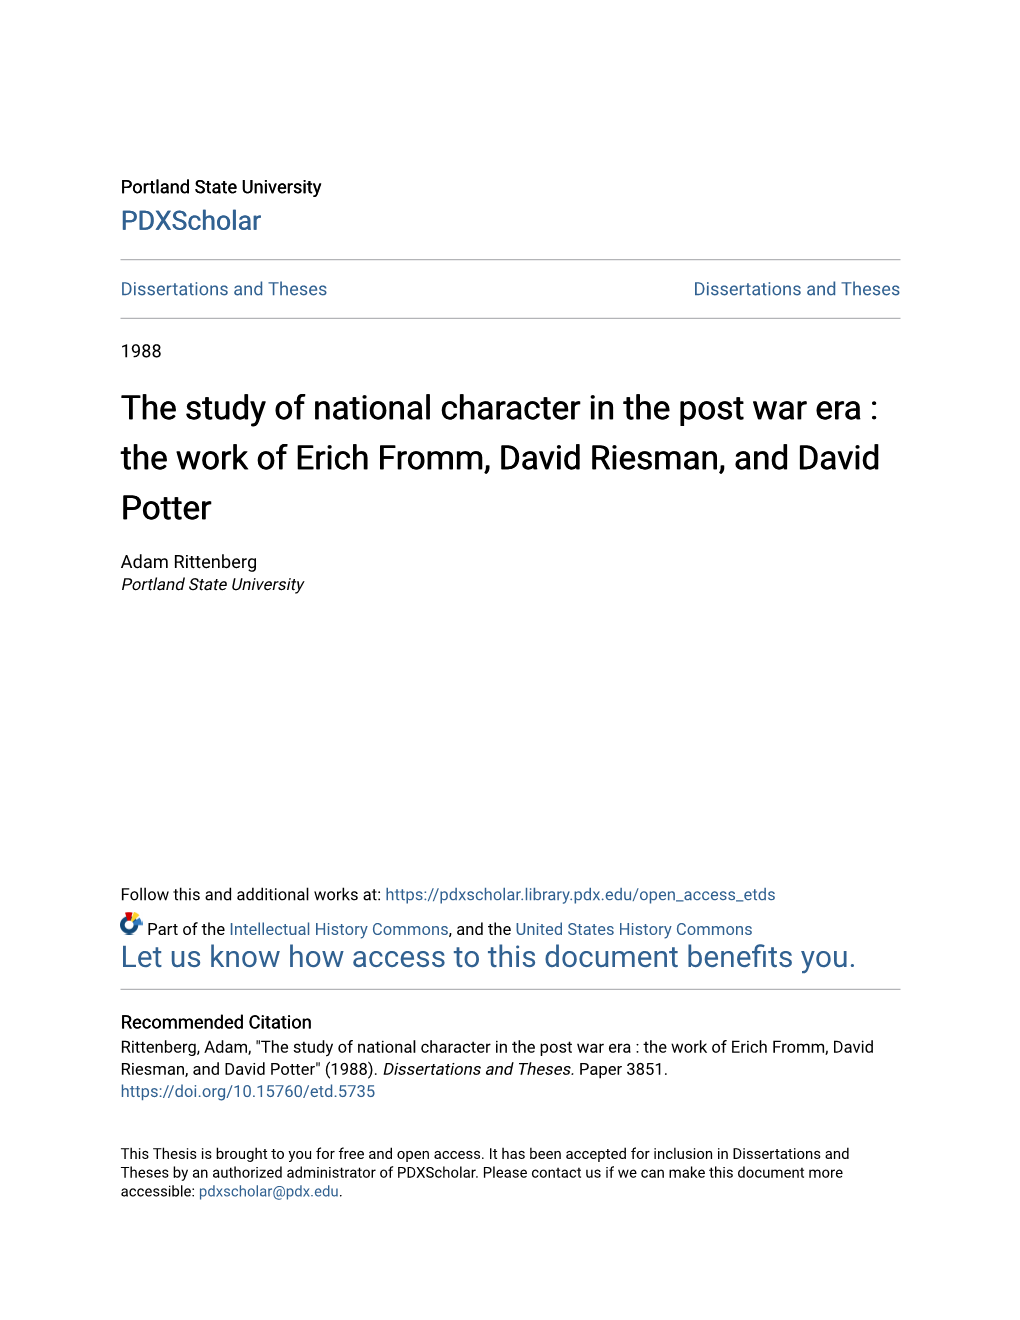 The Work of Erich Fromm, David Riesman, and David Potter